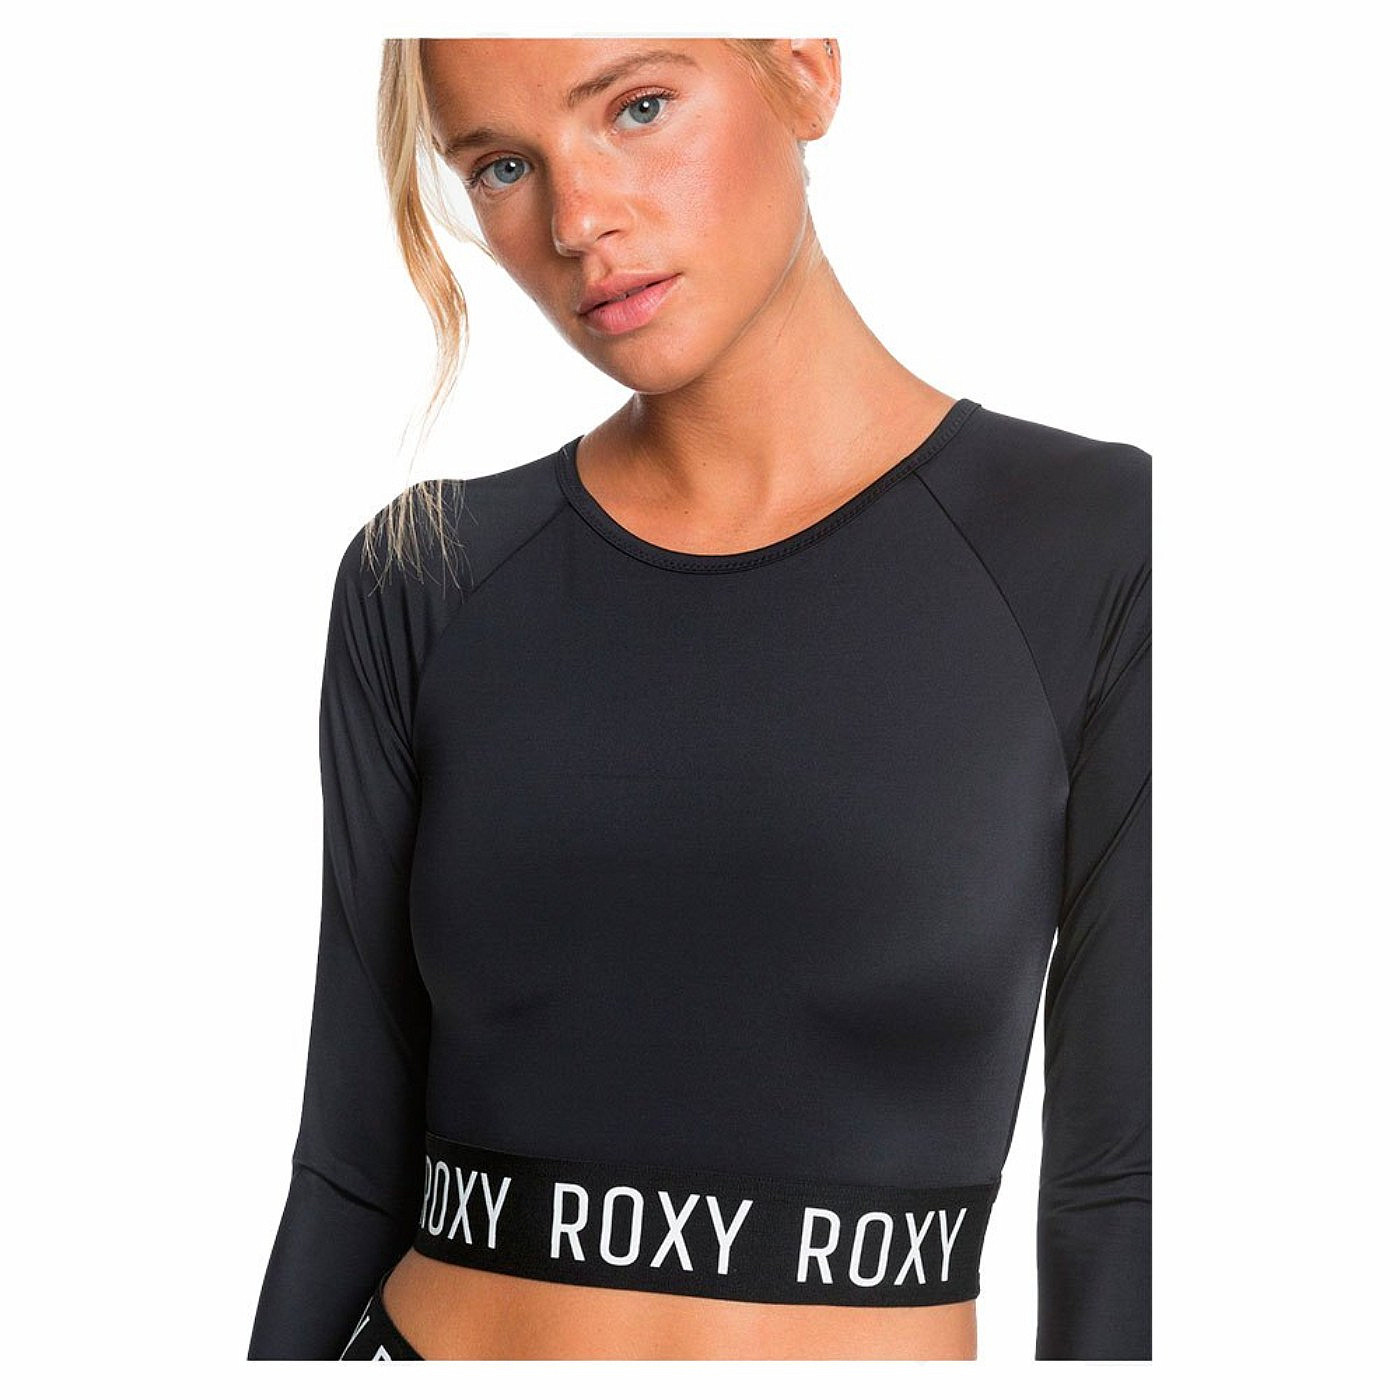 Slink Roest Tegenstrijdigheid Women's lycra top from the iconic brand ROXY | Lycra clothing for women  with UPF 50